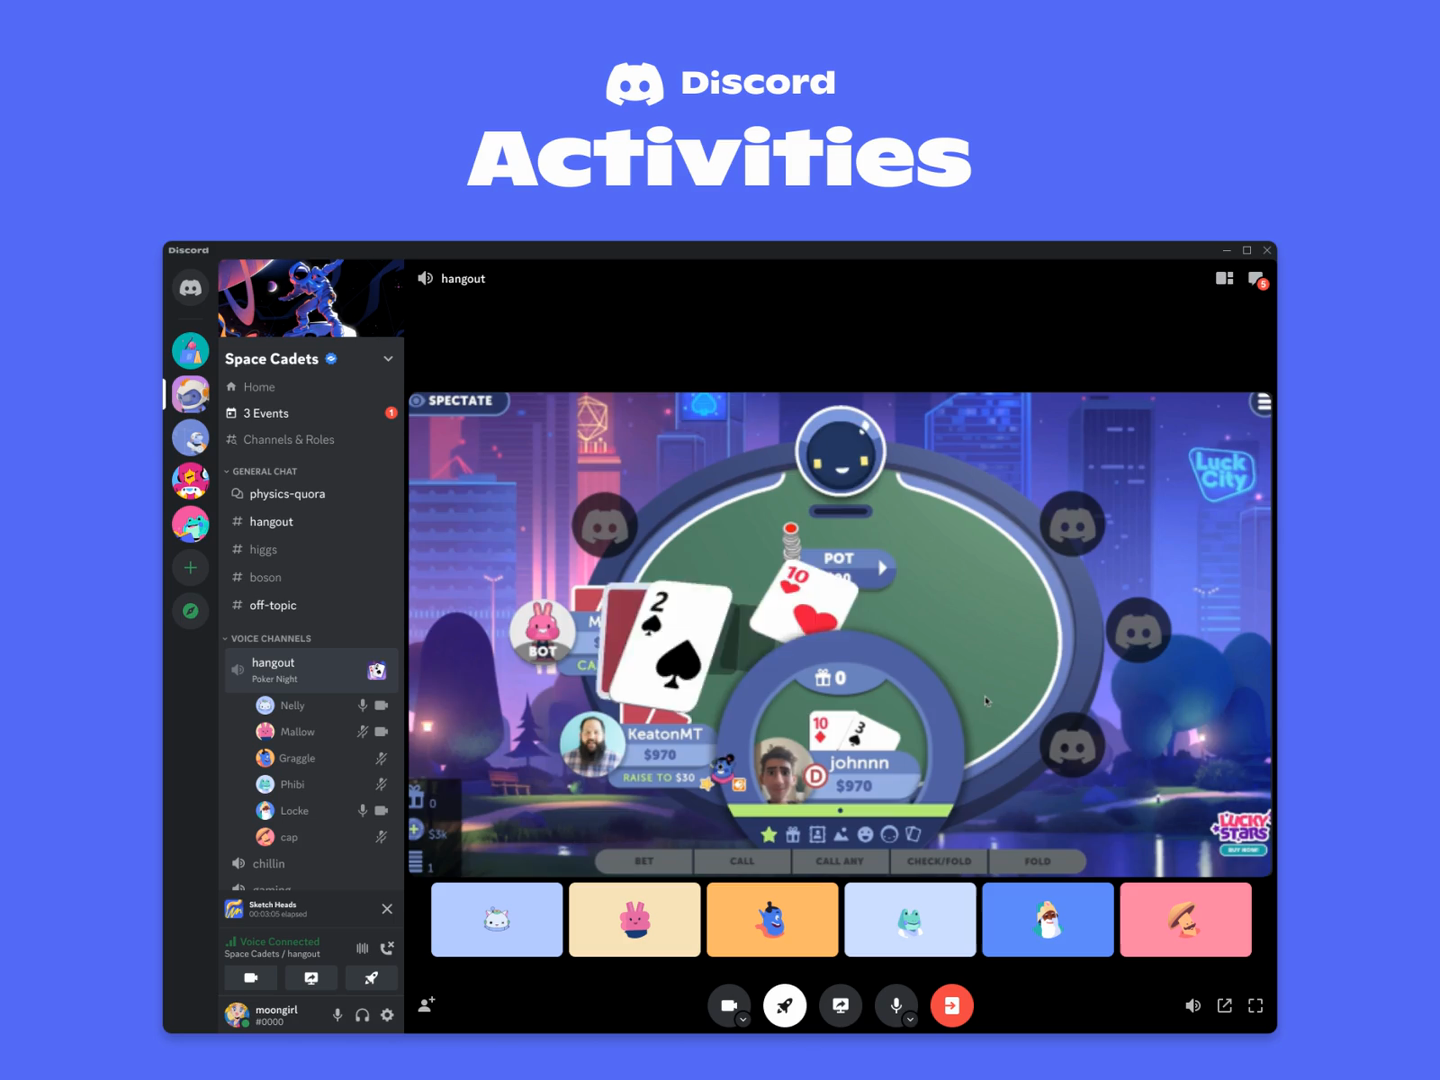 Where can I find discord servers on various topics? - Quora